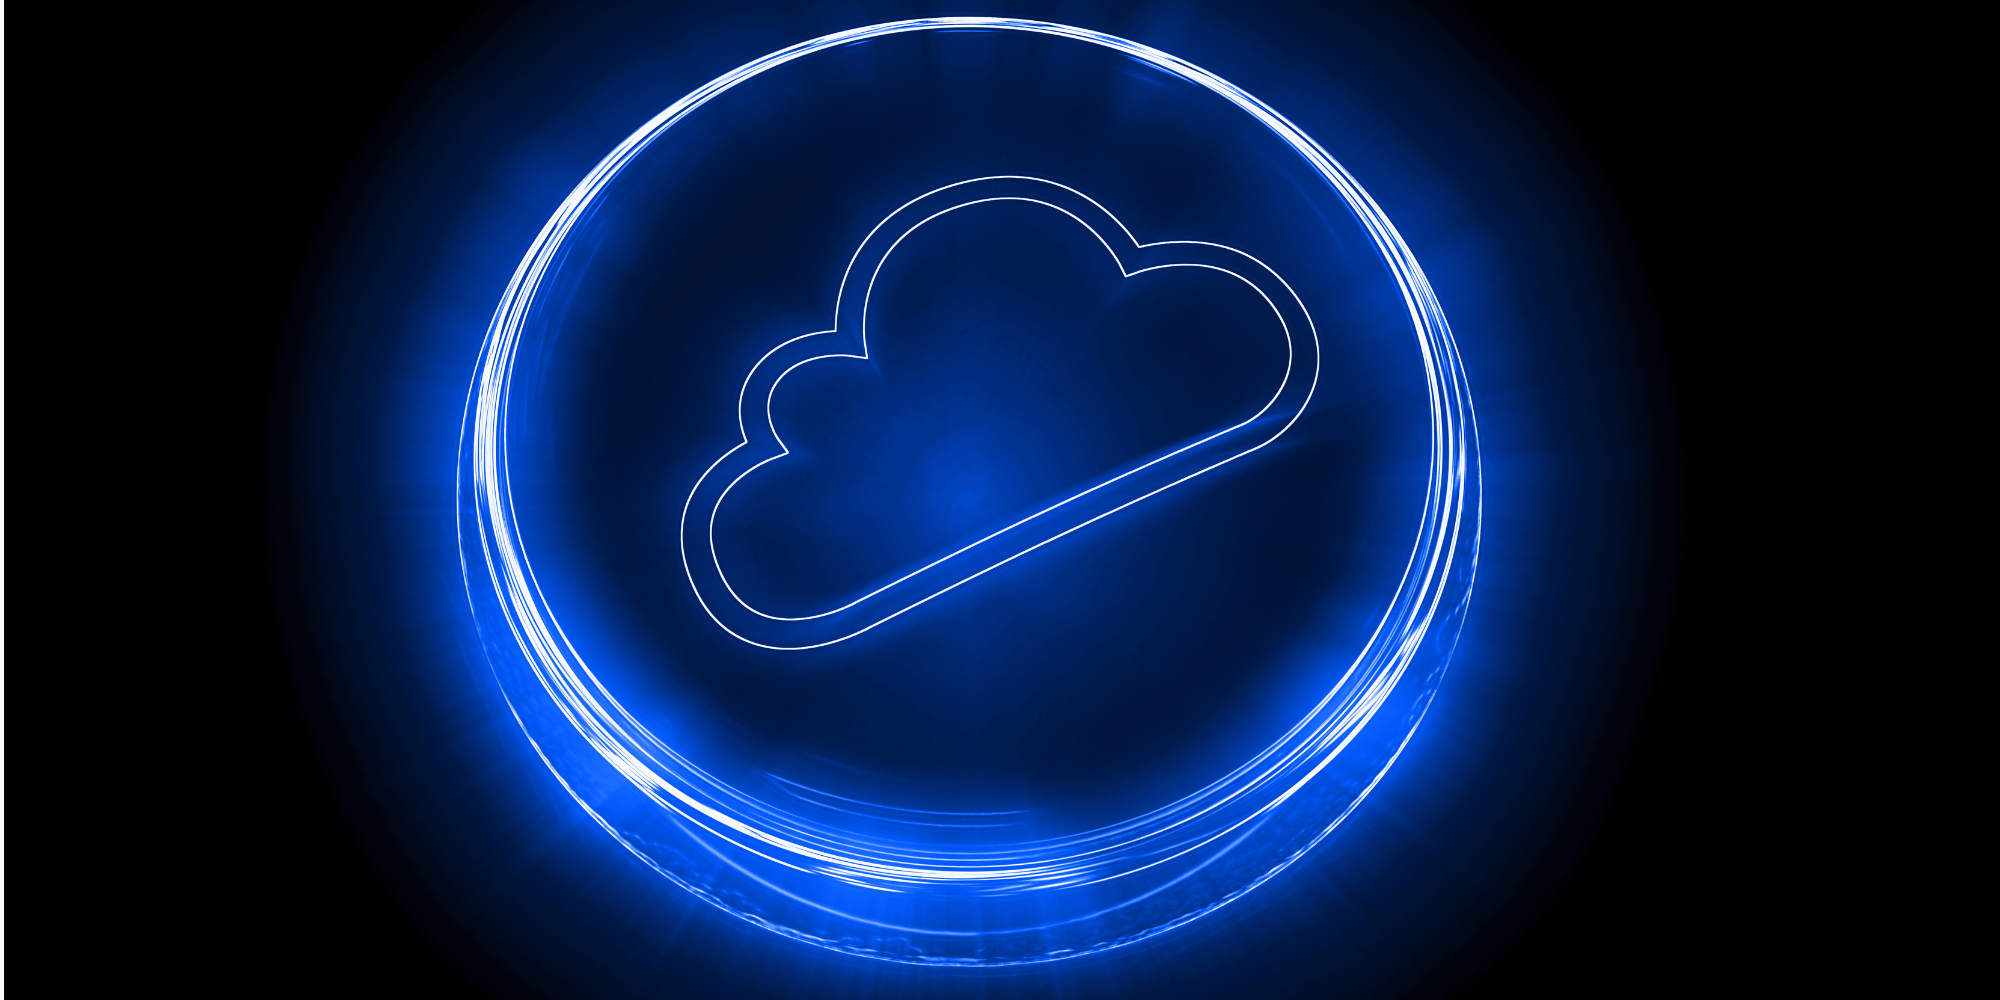 Learn how to plan your cloud storage